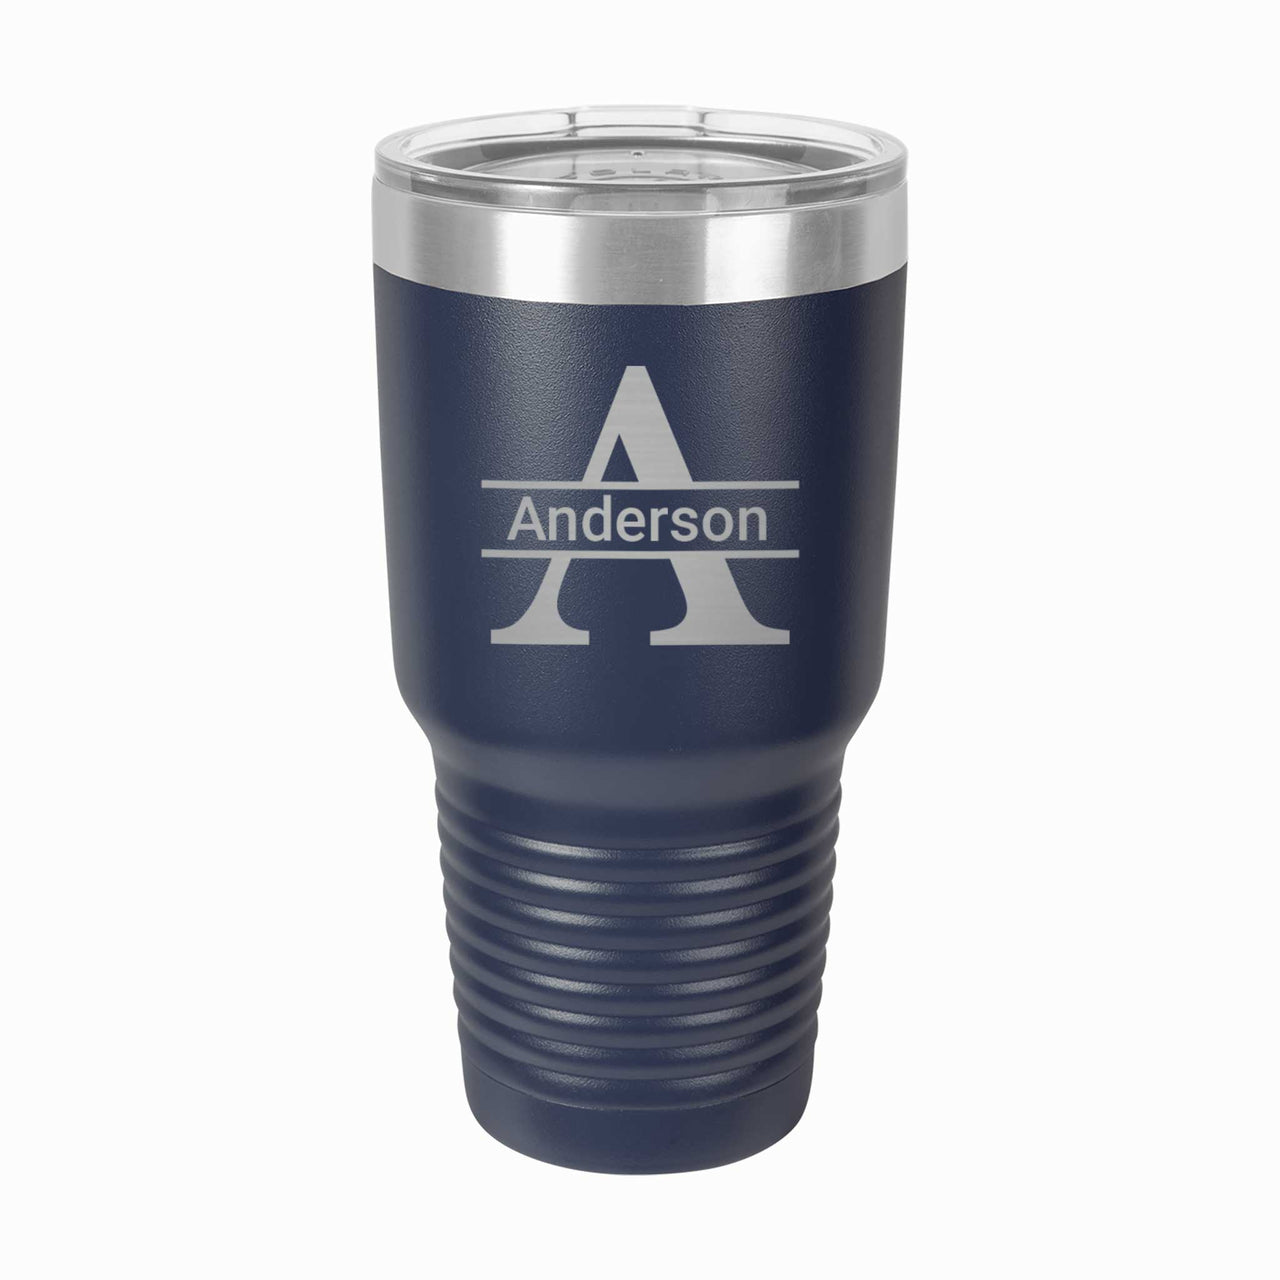 Personalized Steel Tumbler - Name & Initial - Mod Peach